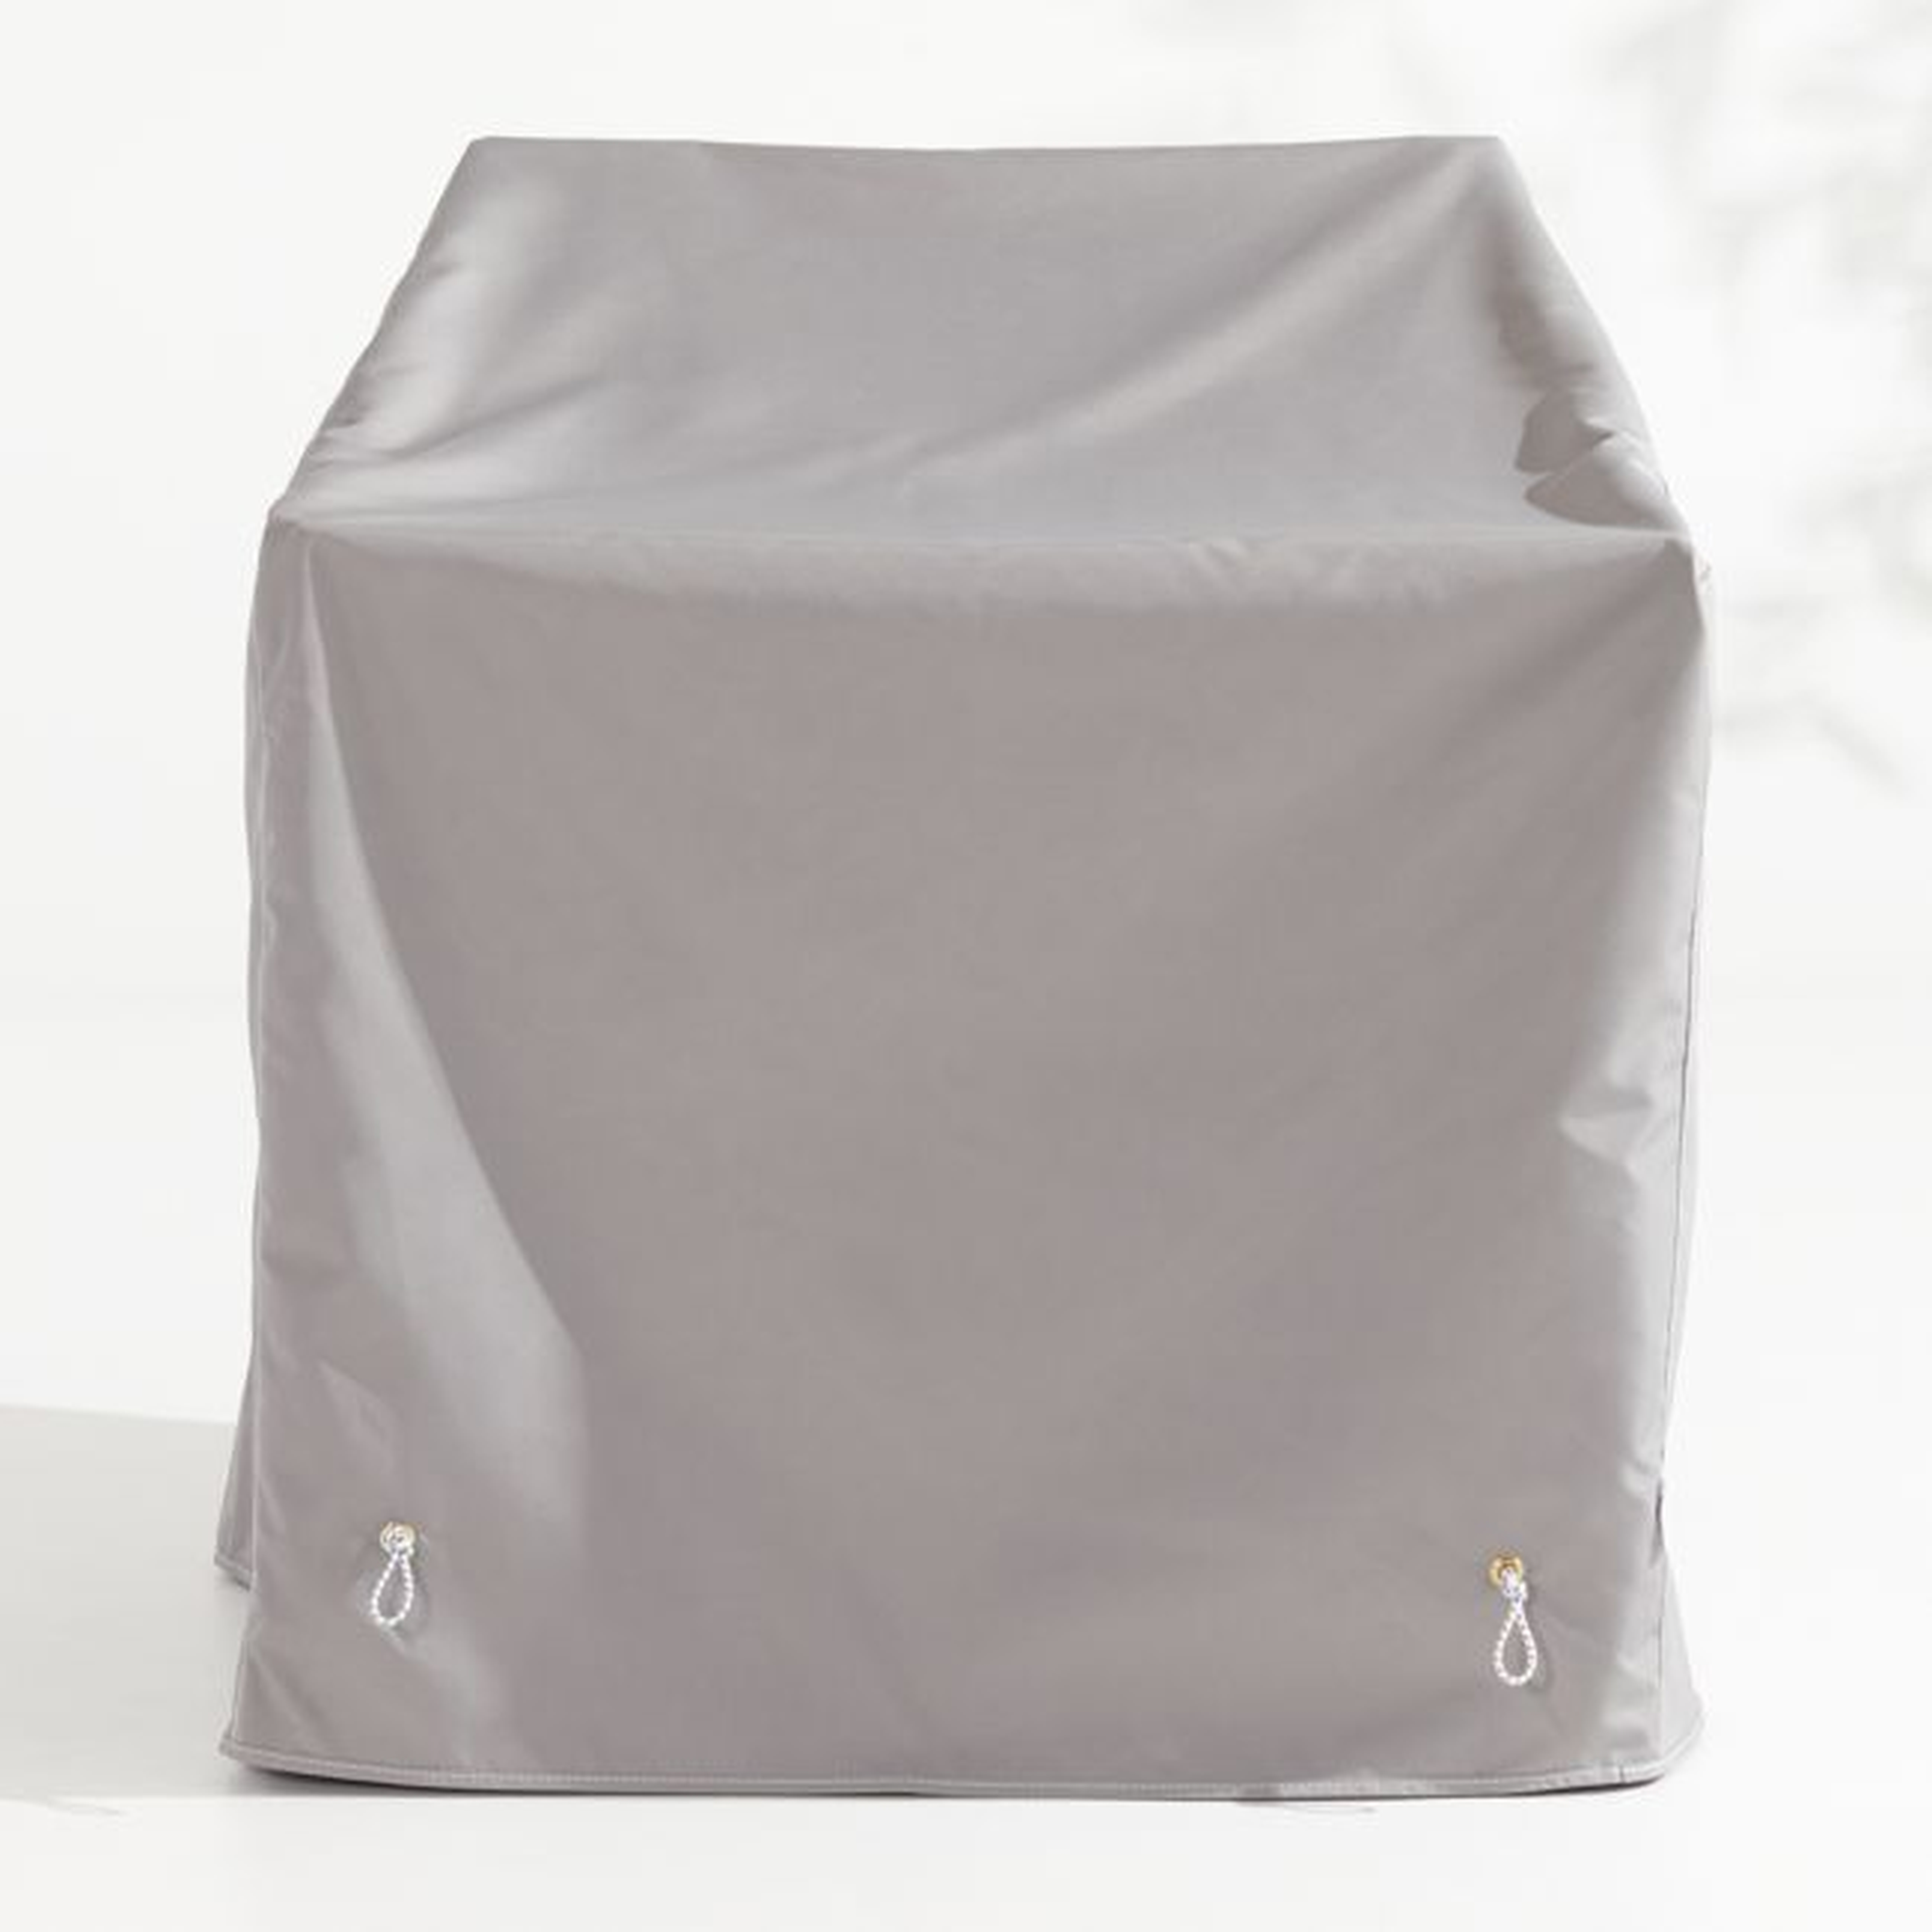 WeatherMAX Outdoor Small Lounge Chair Cover by KoverRoos - Crate and Barrel